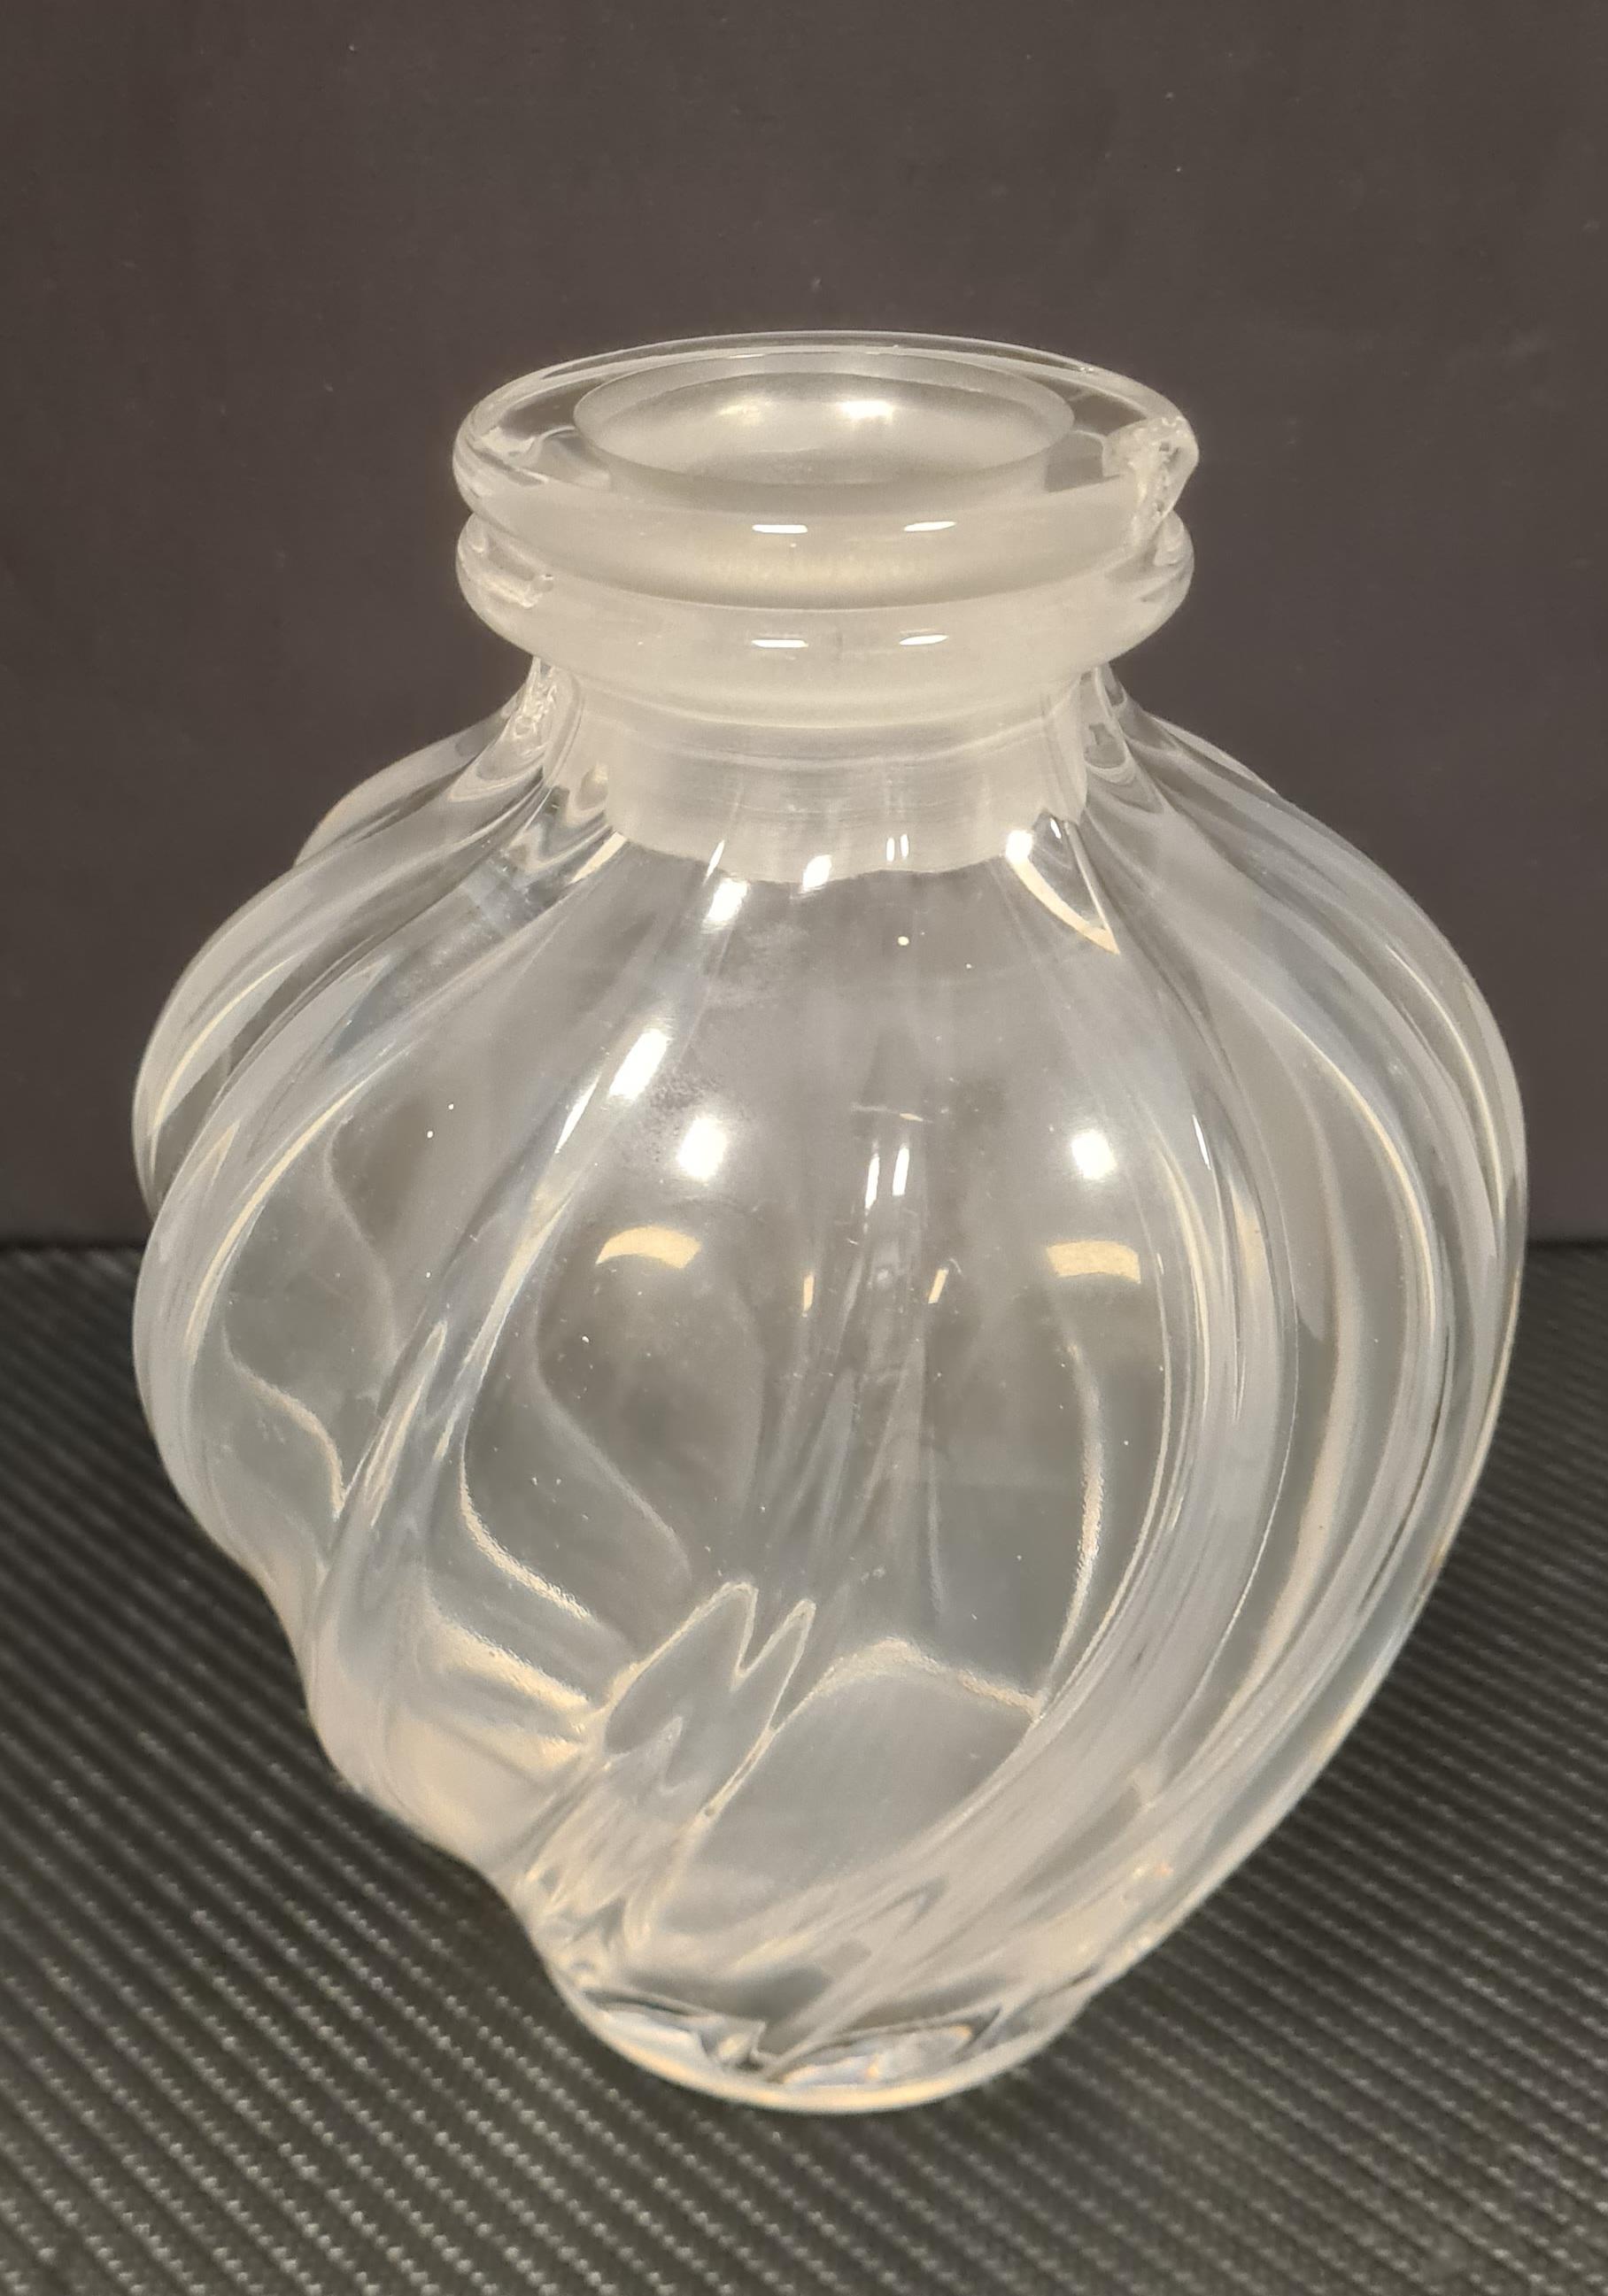 Glass Large collectible Lalique glass bottle of the perfume L'air du temps For Sale